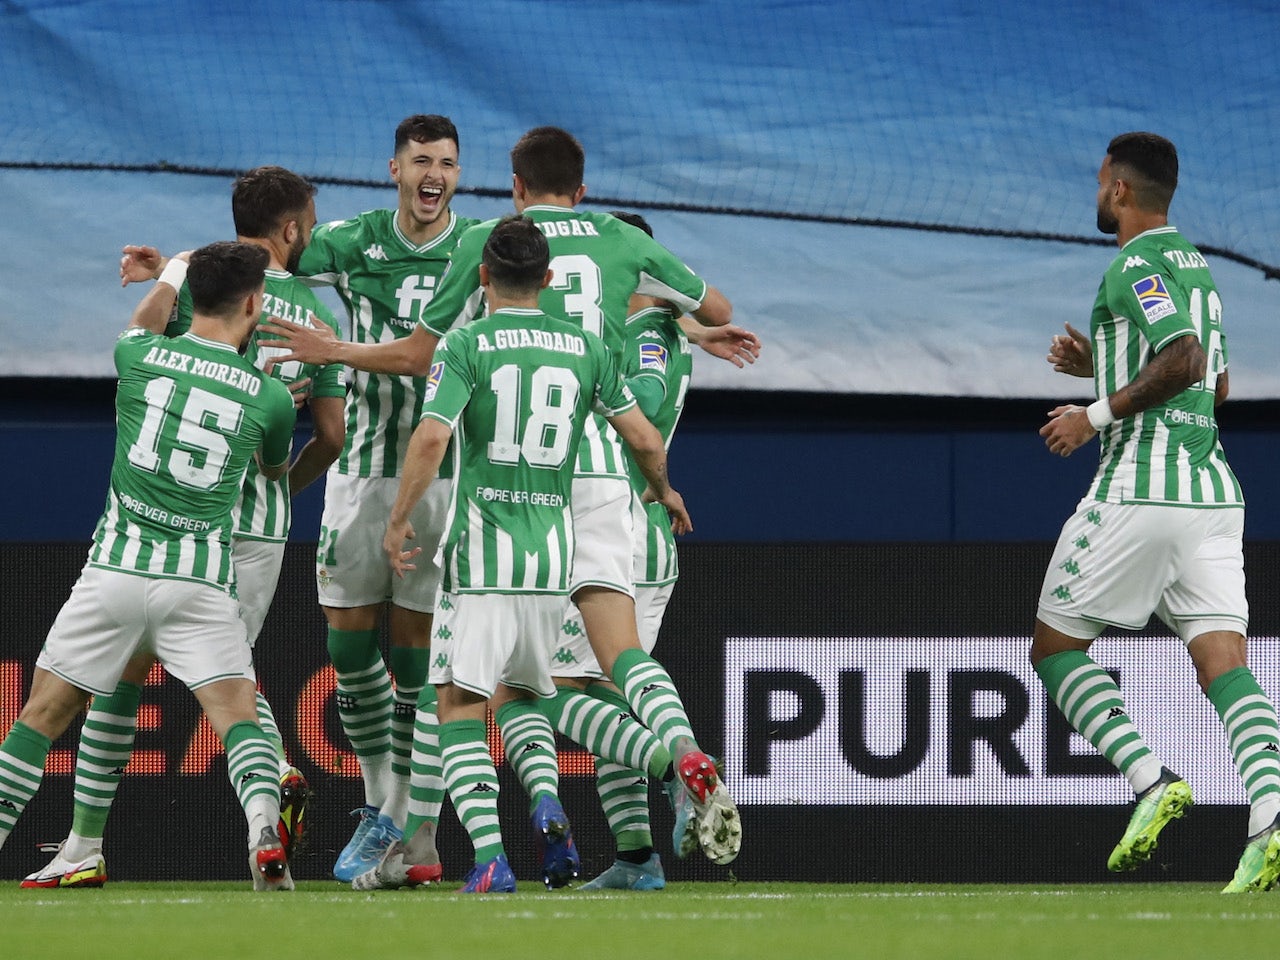 Sevilla vs betis betting experts famous quotes about investing in people